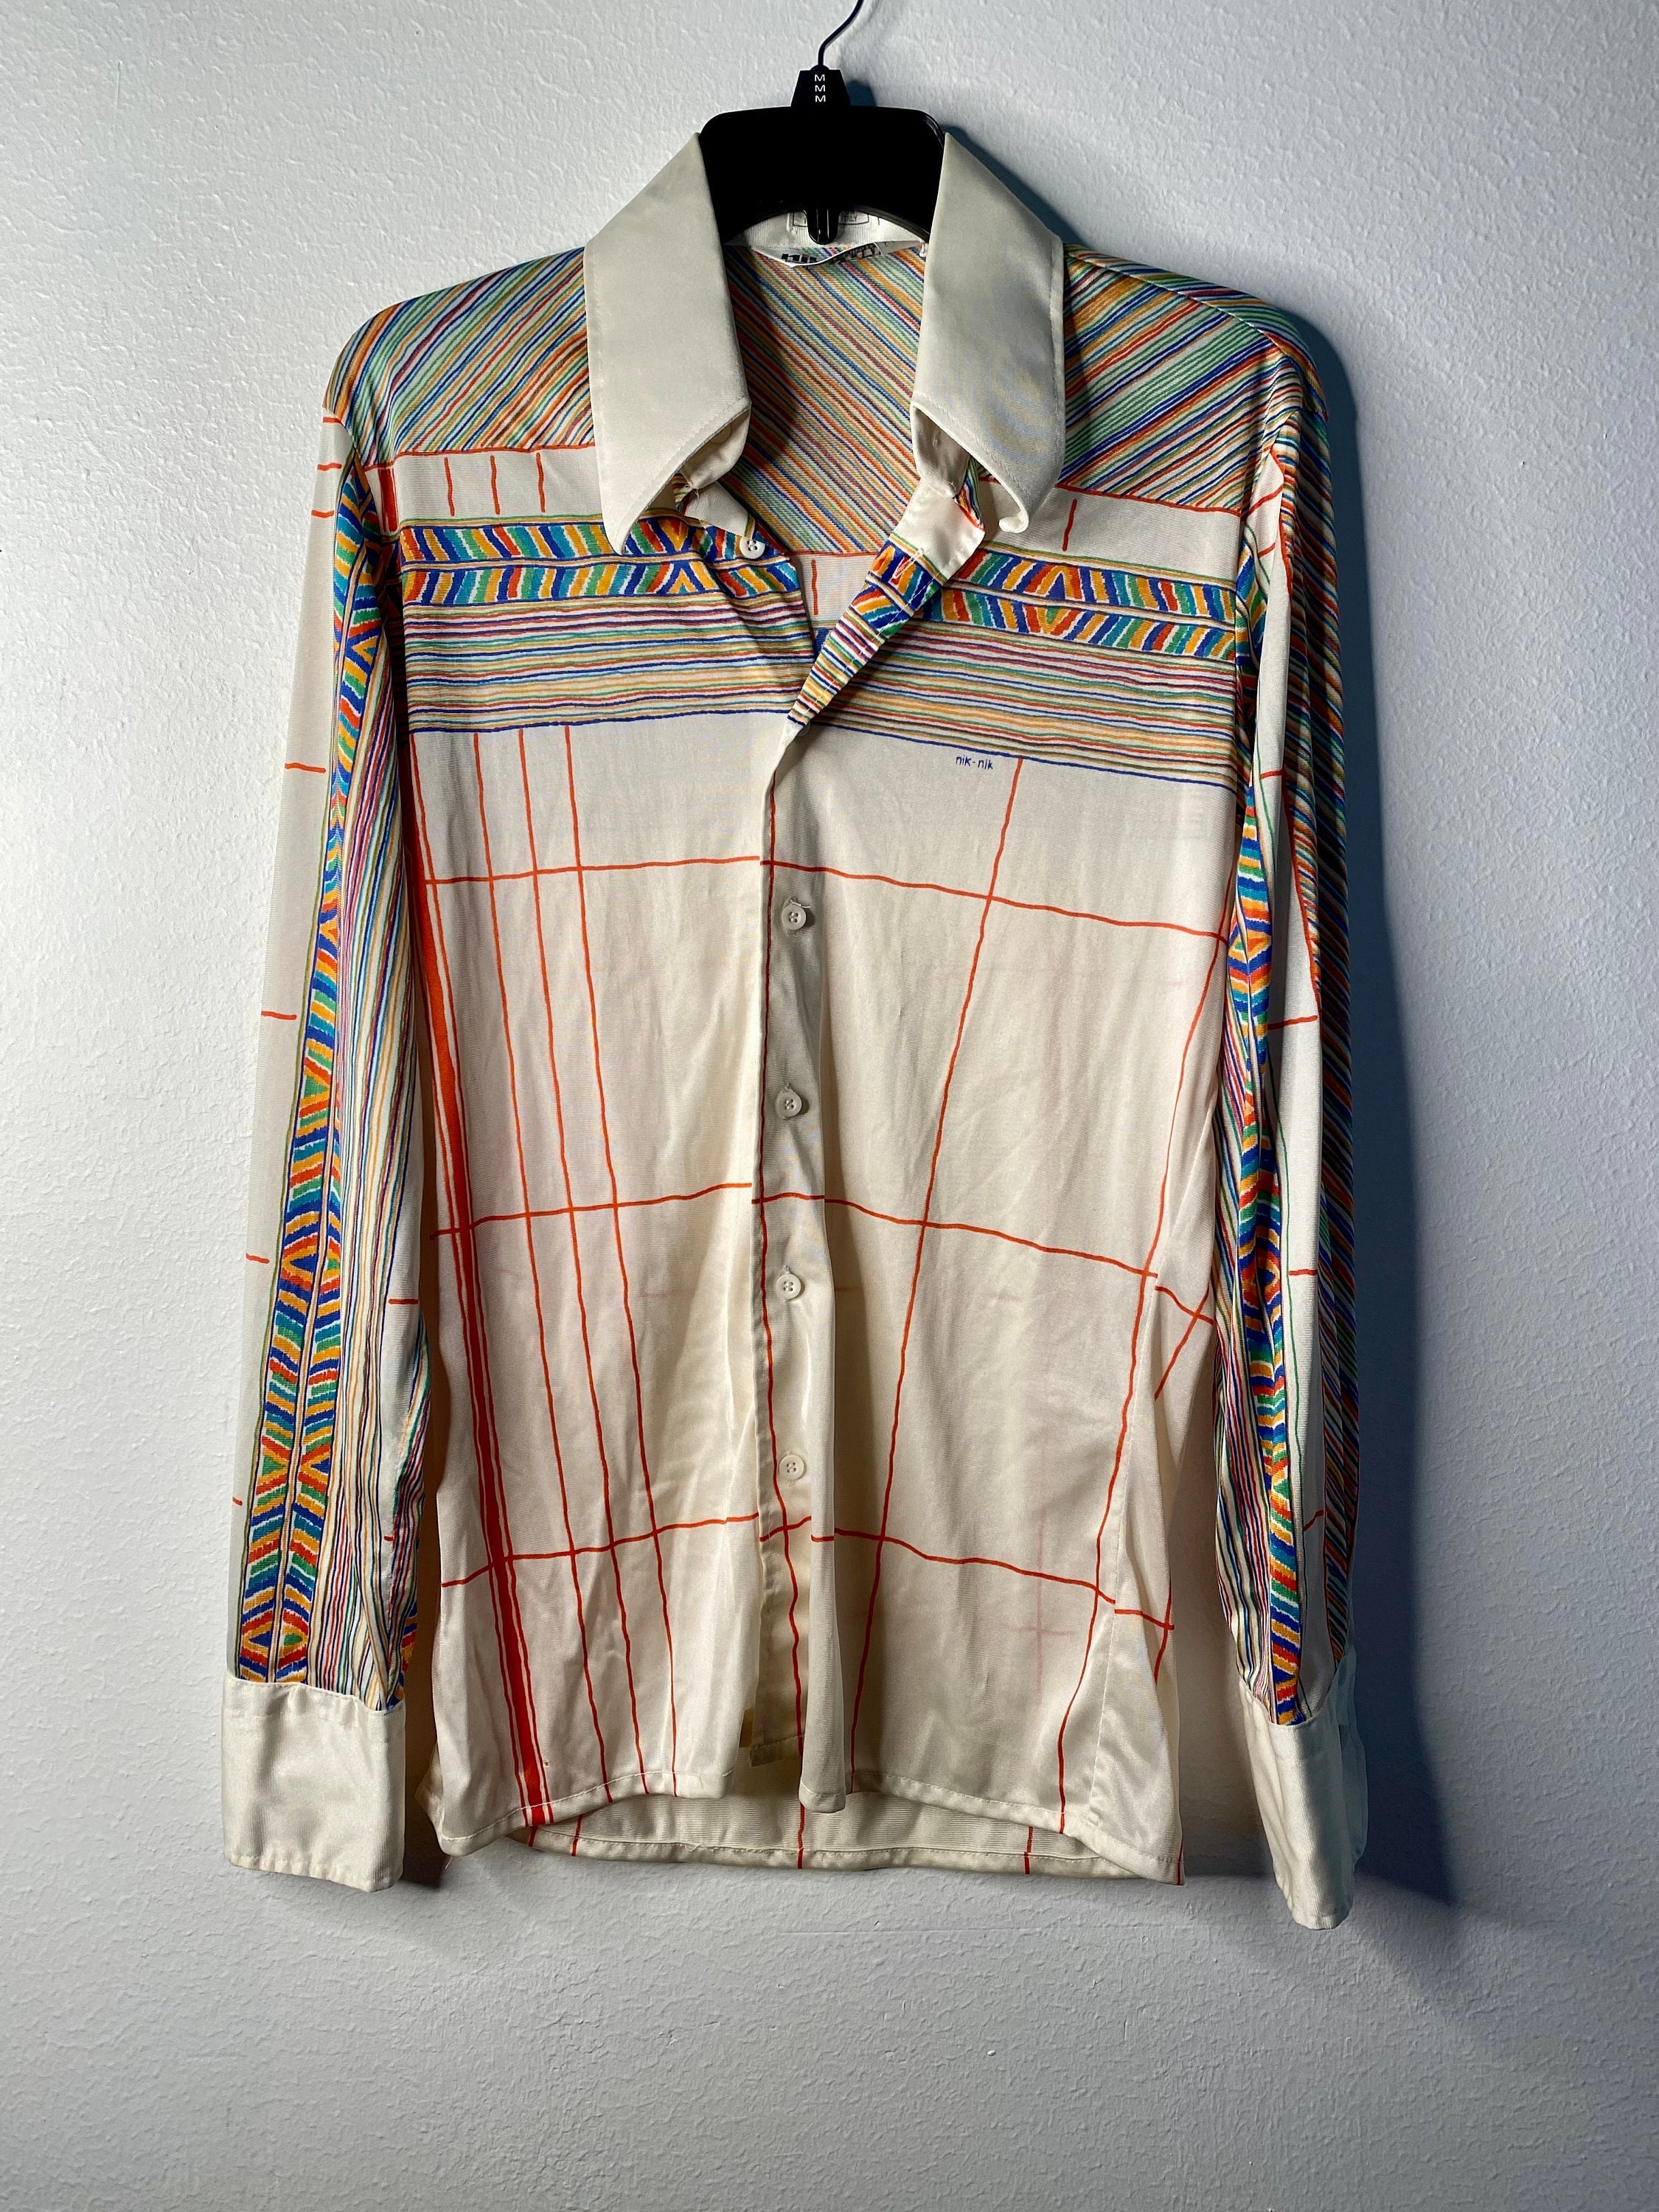 Vintage 1970s nik Nik Disco Shirt With and Bright - Etsy